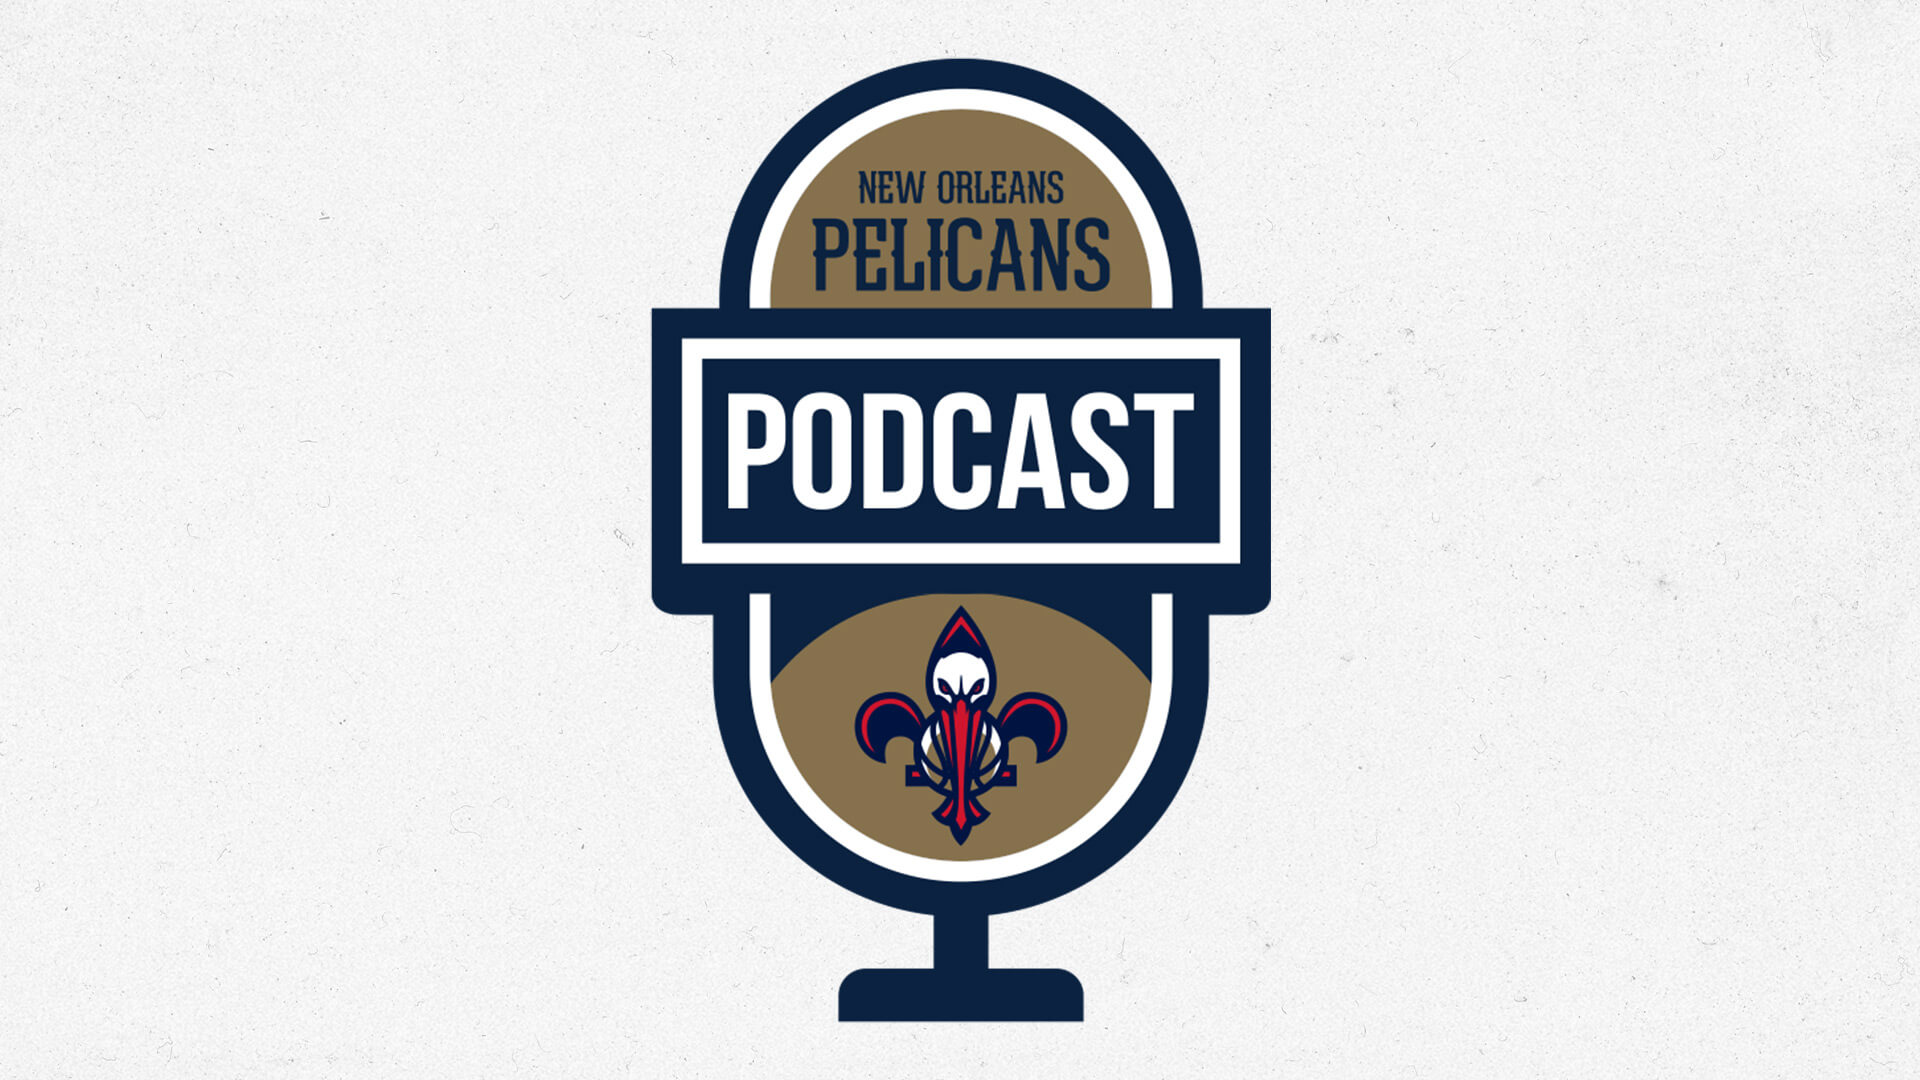 Weekend recap, look ahead to Knicks & Pacers matchups | Pelicans Podcast